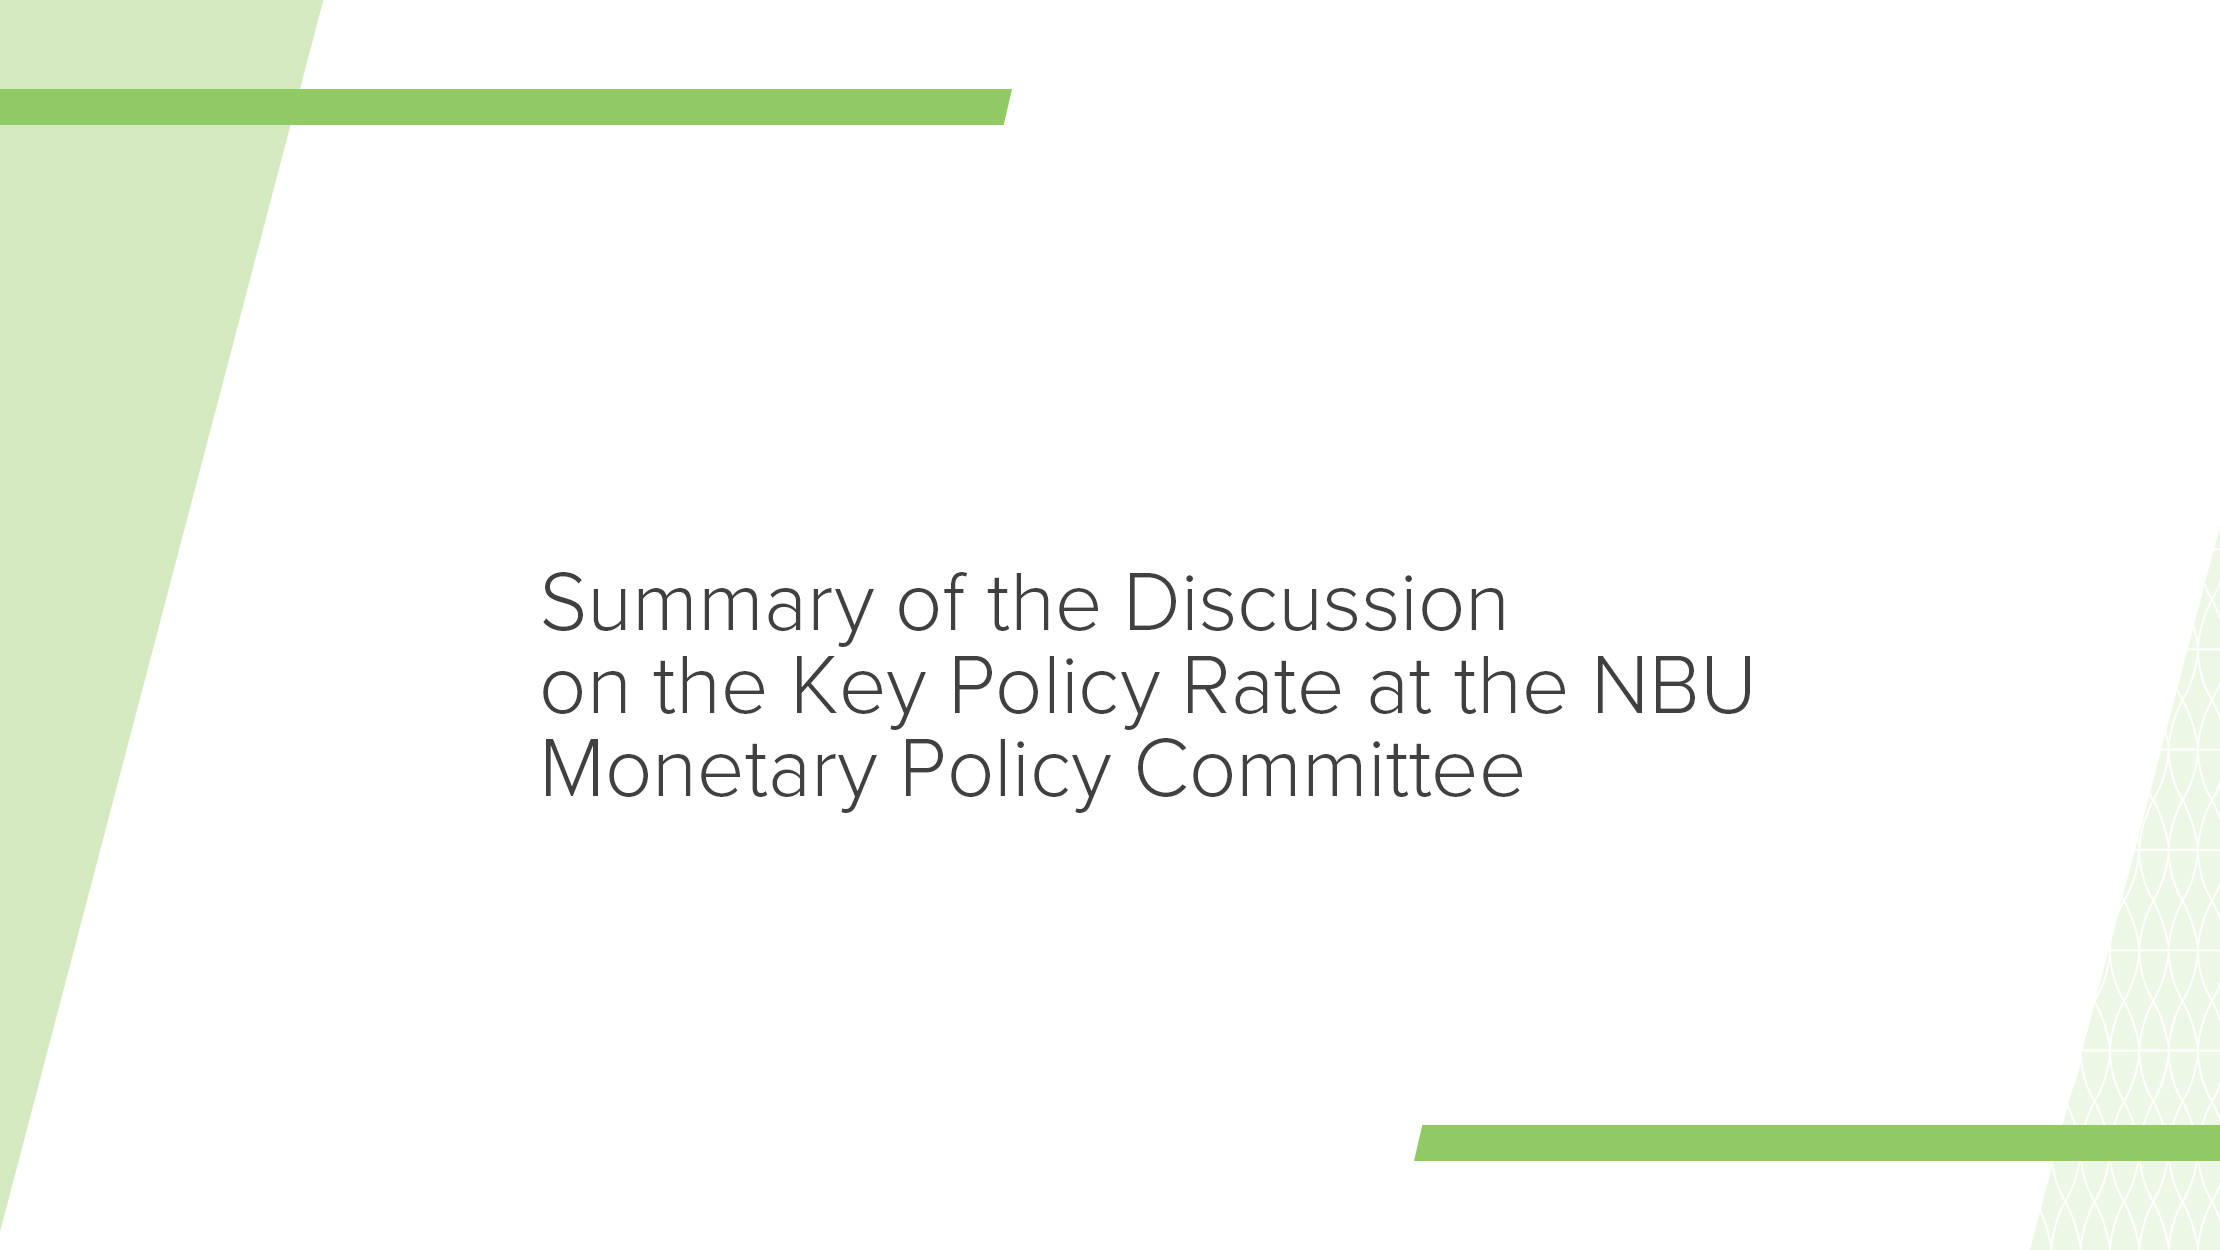 Summary of Key Policy Rate Discussion by NBU Monetary Policy Committee